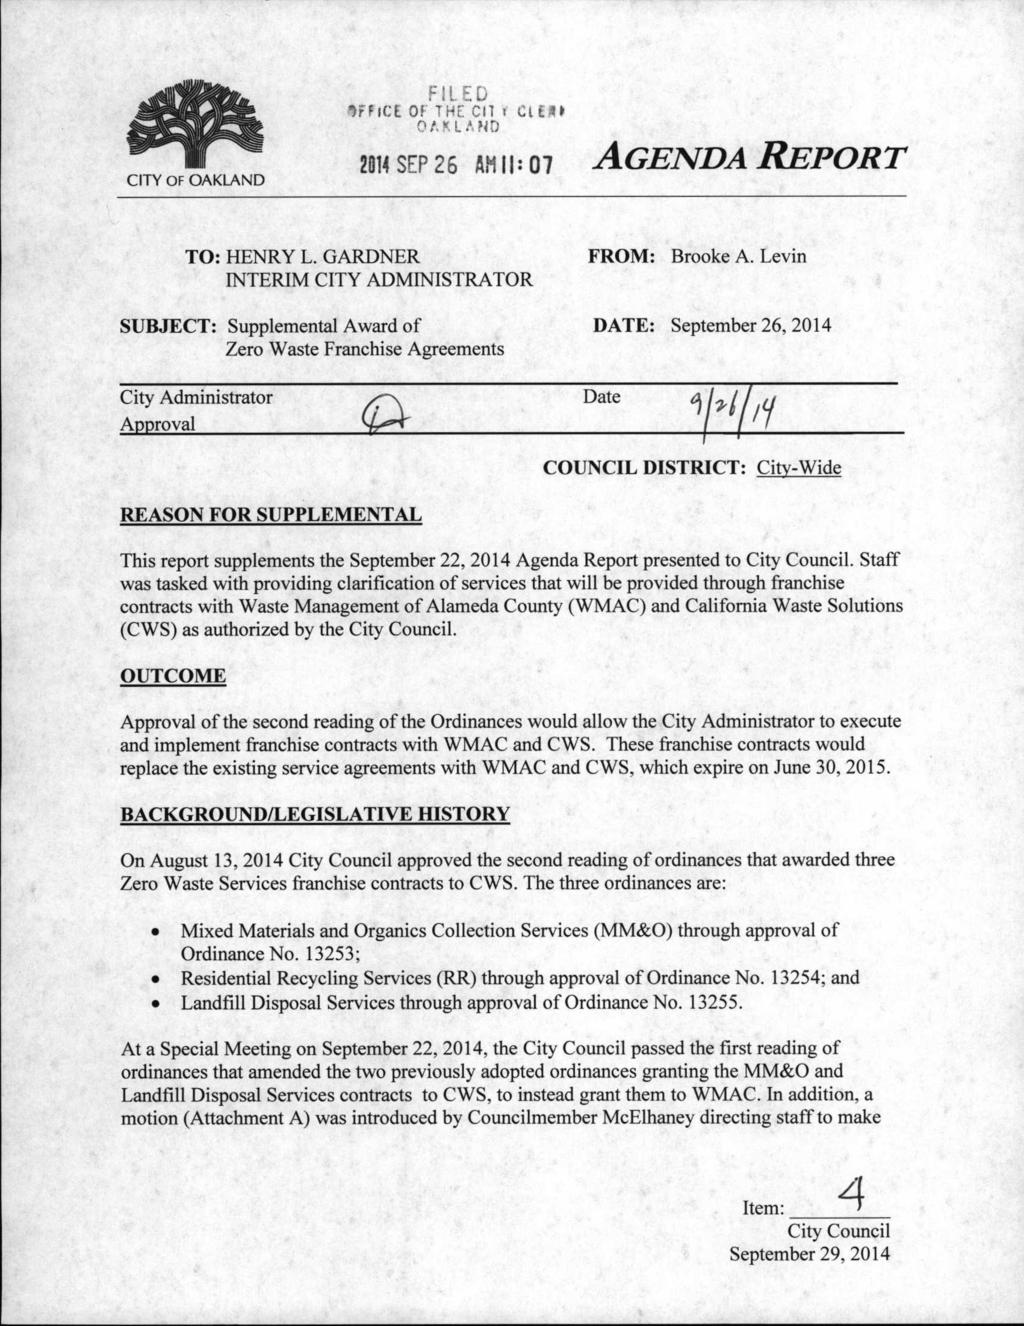 CITY OF OAKLAND FILED FhCE OF THE CIl t Cl S» OAKLAND 21)14 SEP 25 AM II: 07 AGENDA REPORT TO: HENRY L. GARDNER INTERIM CITY ADMINISTRATOR FROM: Brooke A.